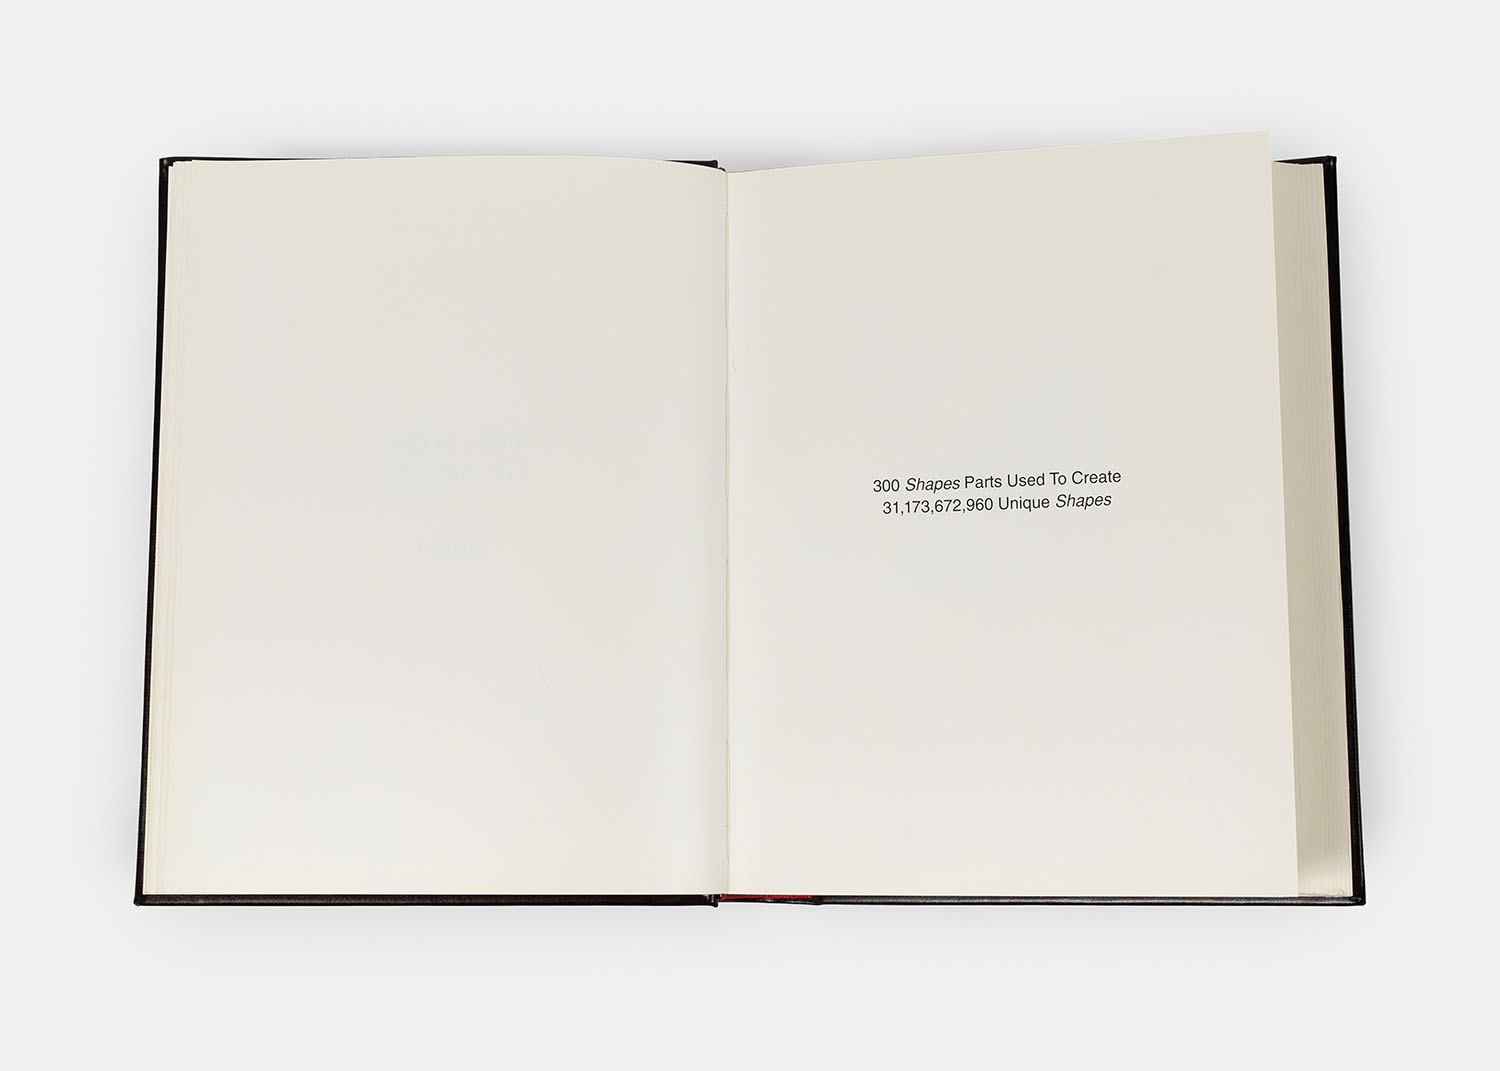 The Book of Shapes, 2010 - Vue suppl&eacute;mentaire